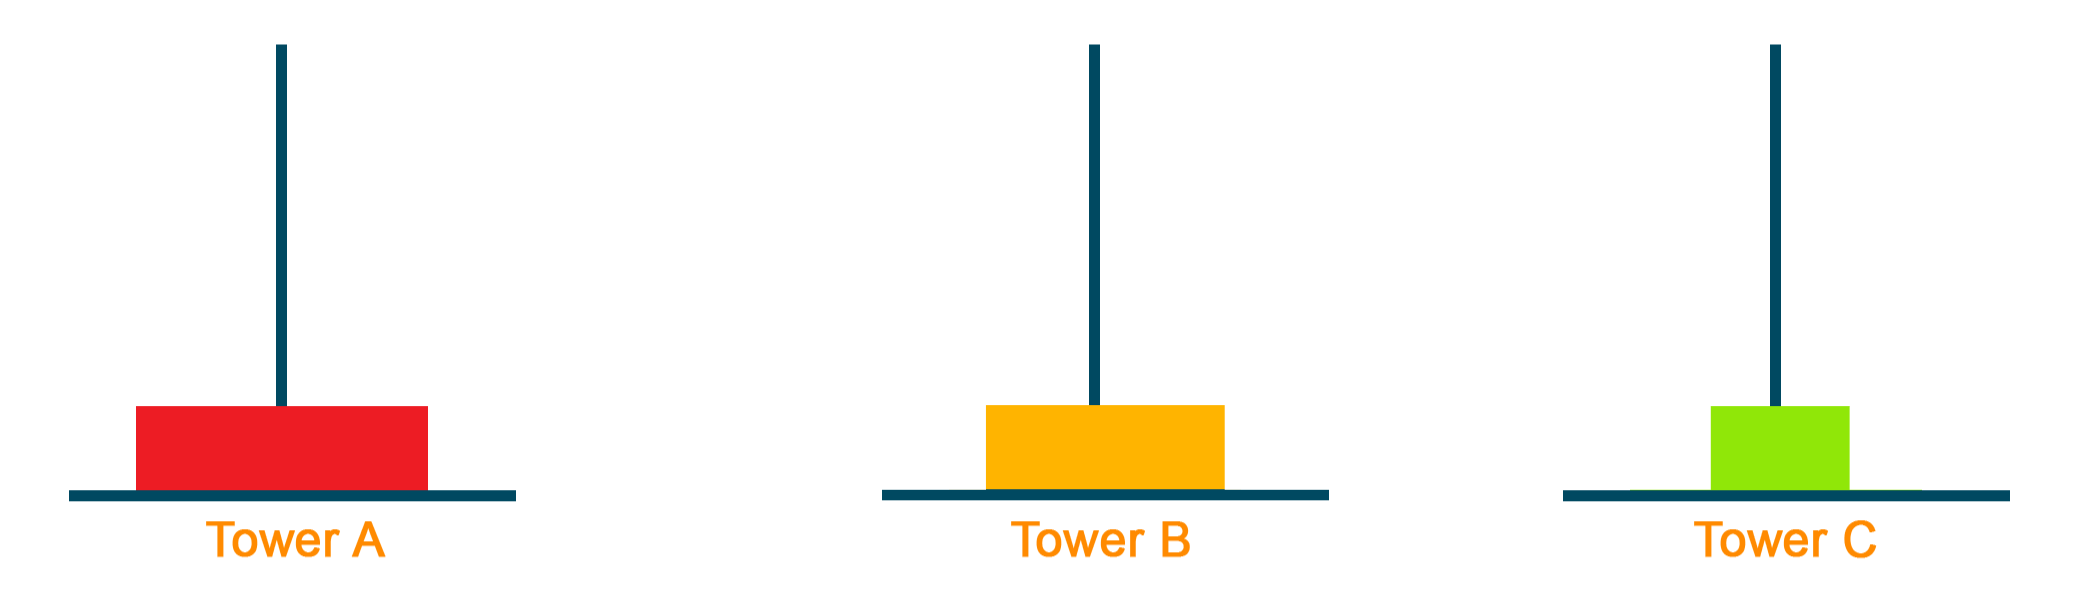 Moving middle block to Tower B